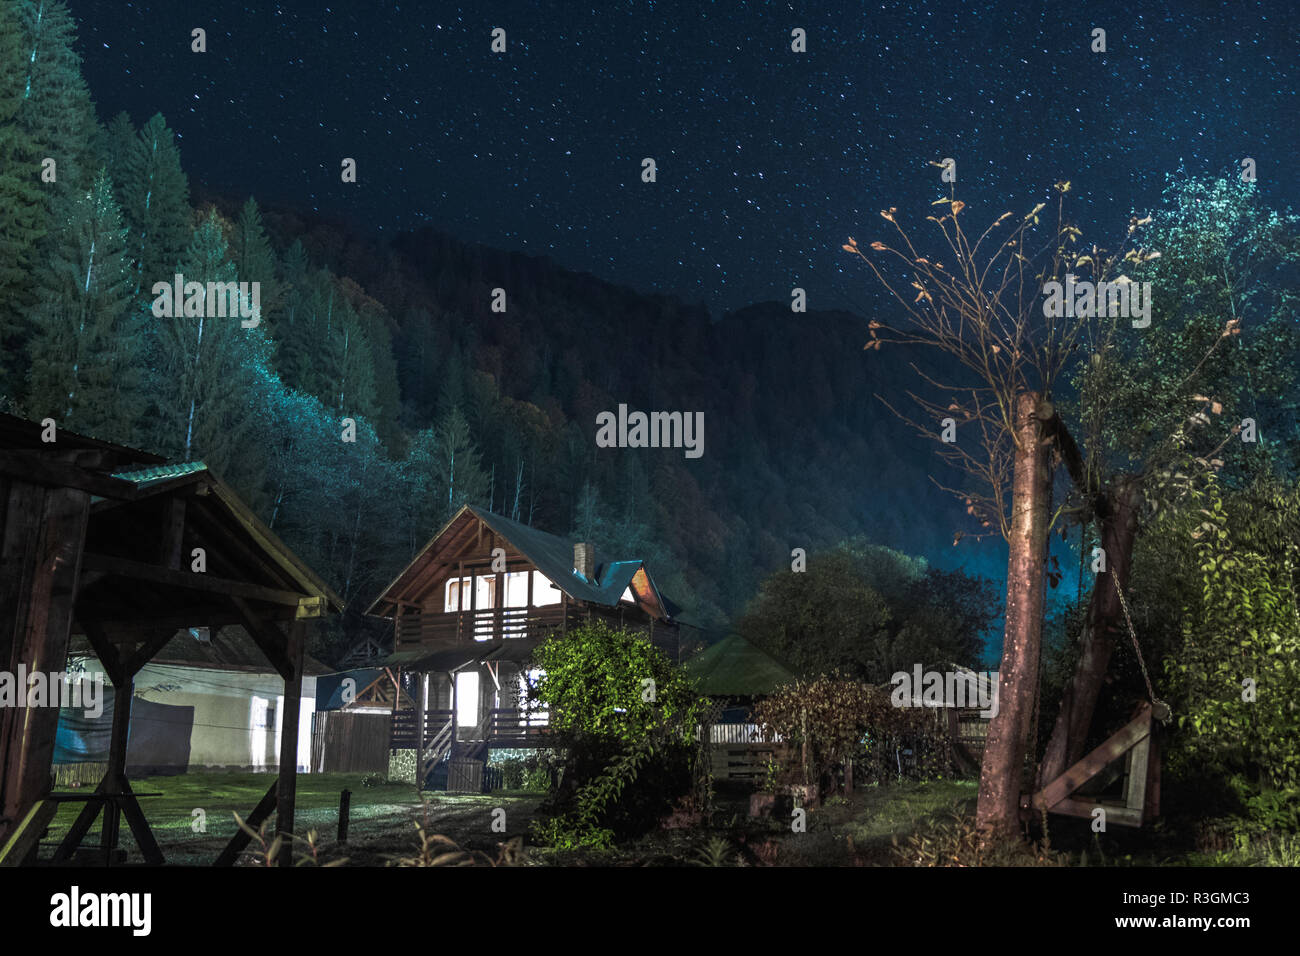 Wooden house at night and stars Stock Photo